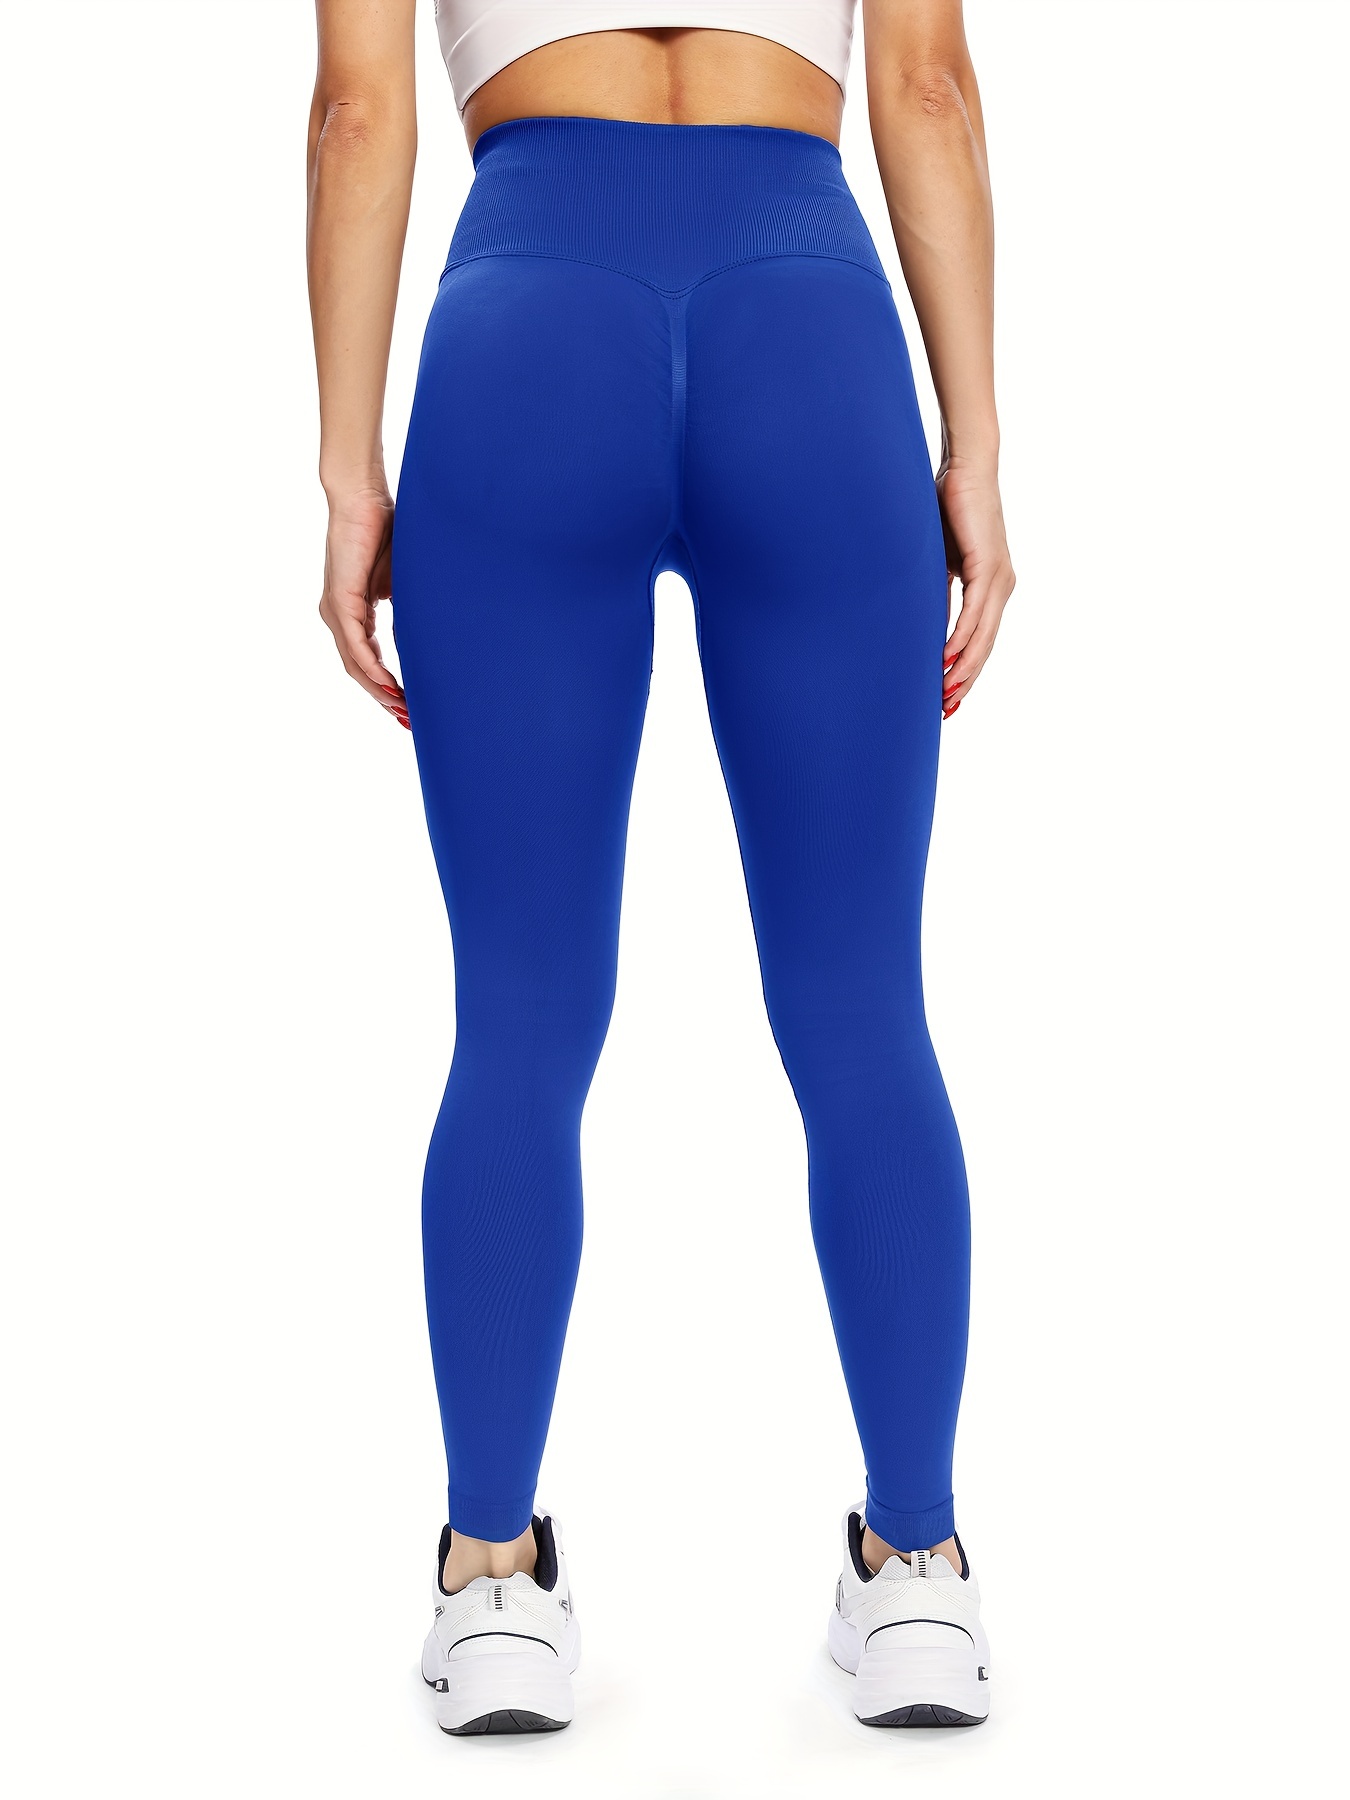  Workout Leggings For Women High Waist Tummy Control Women  Seamless Yoga Athletic Pants Workout High Waist Running Tummy Control  Sports Scrunch Butt Lifting Booty Leggings Blue : Sports & Outdoors